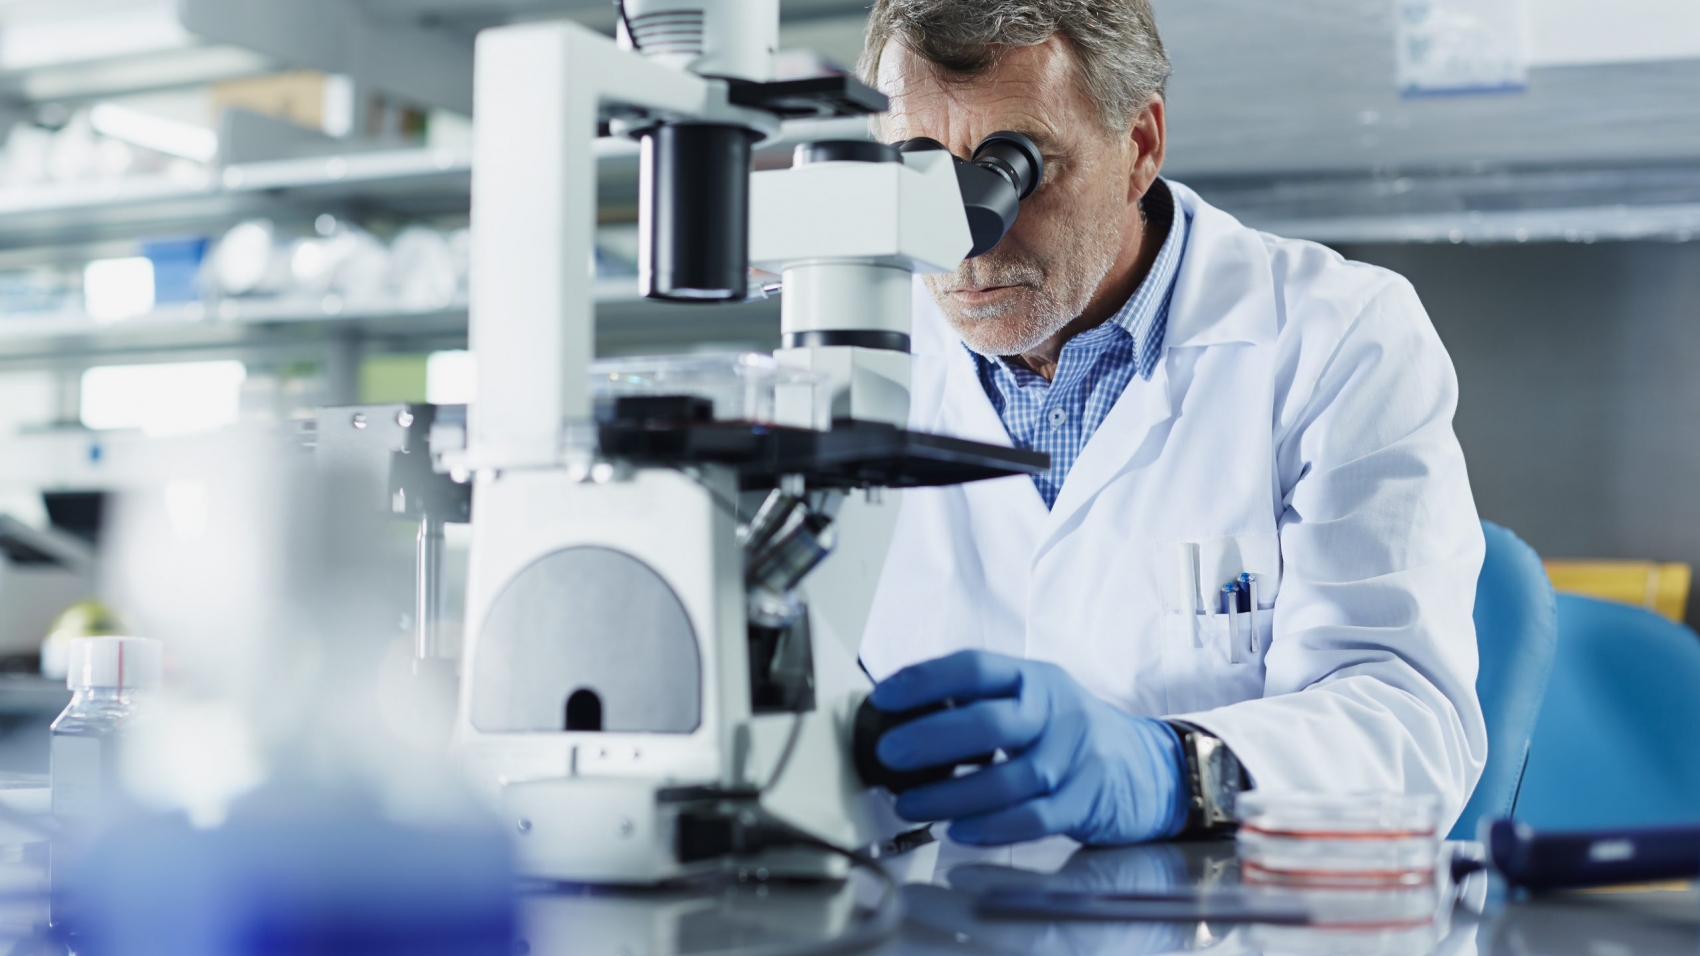 Scientist looking through microscope in research laboratory